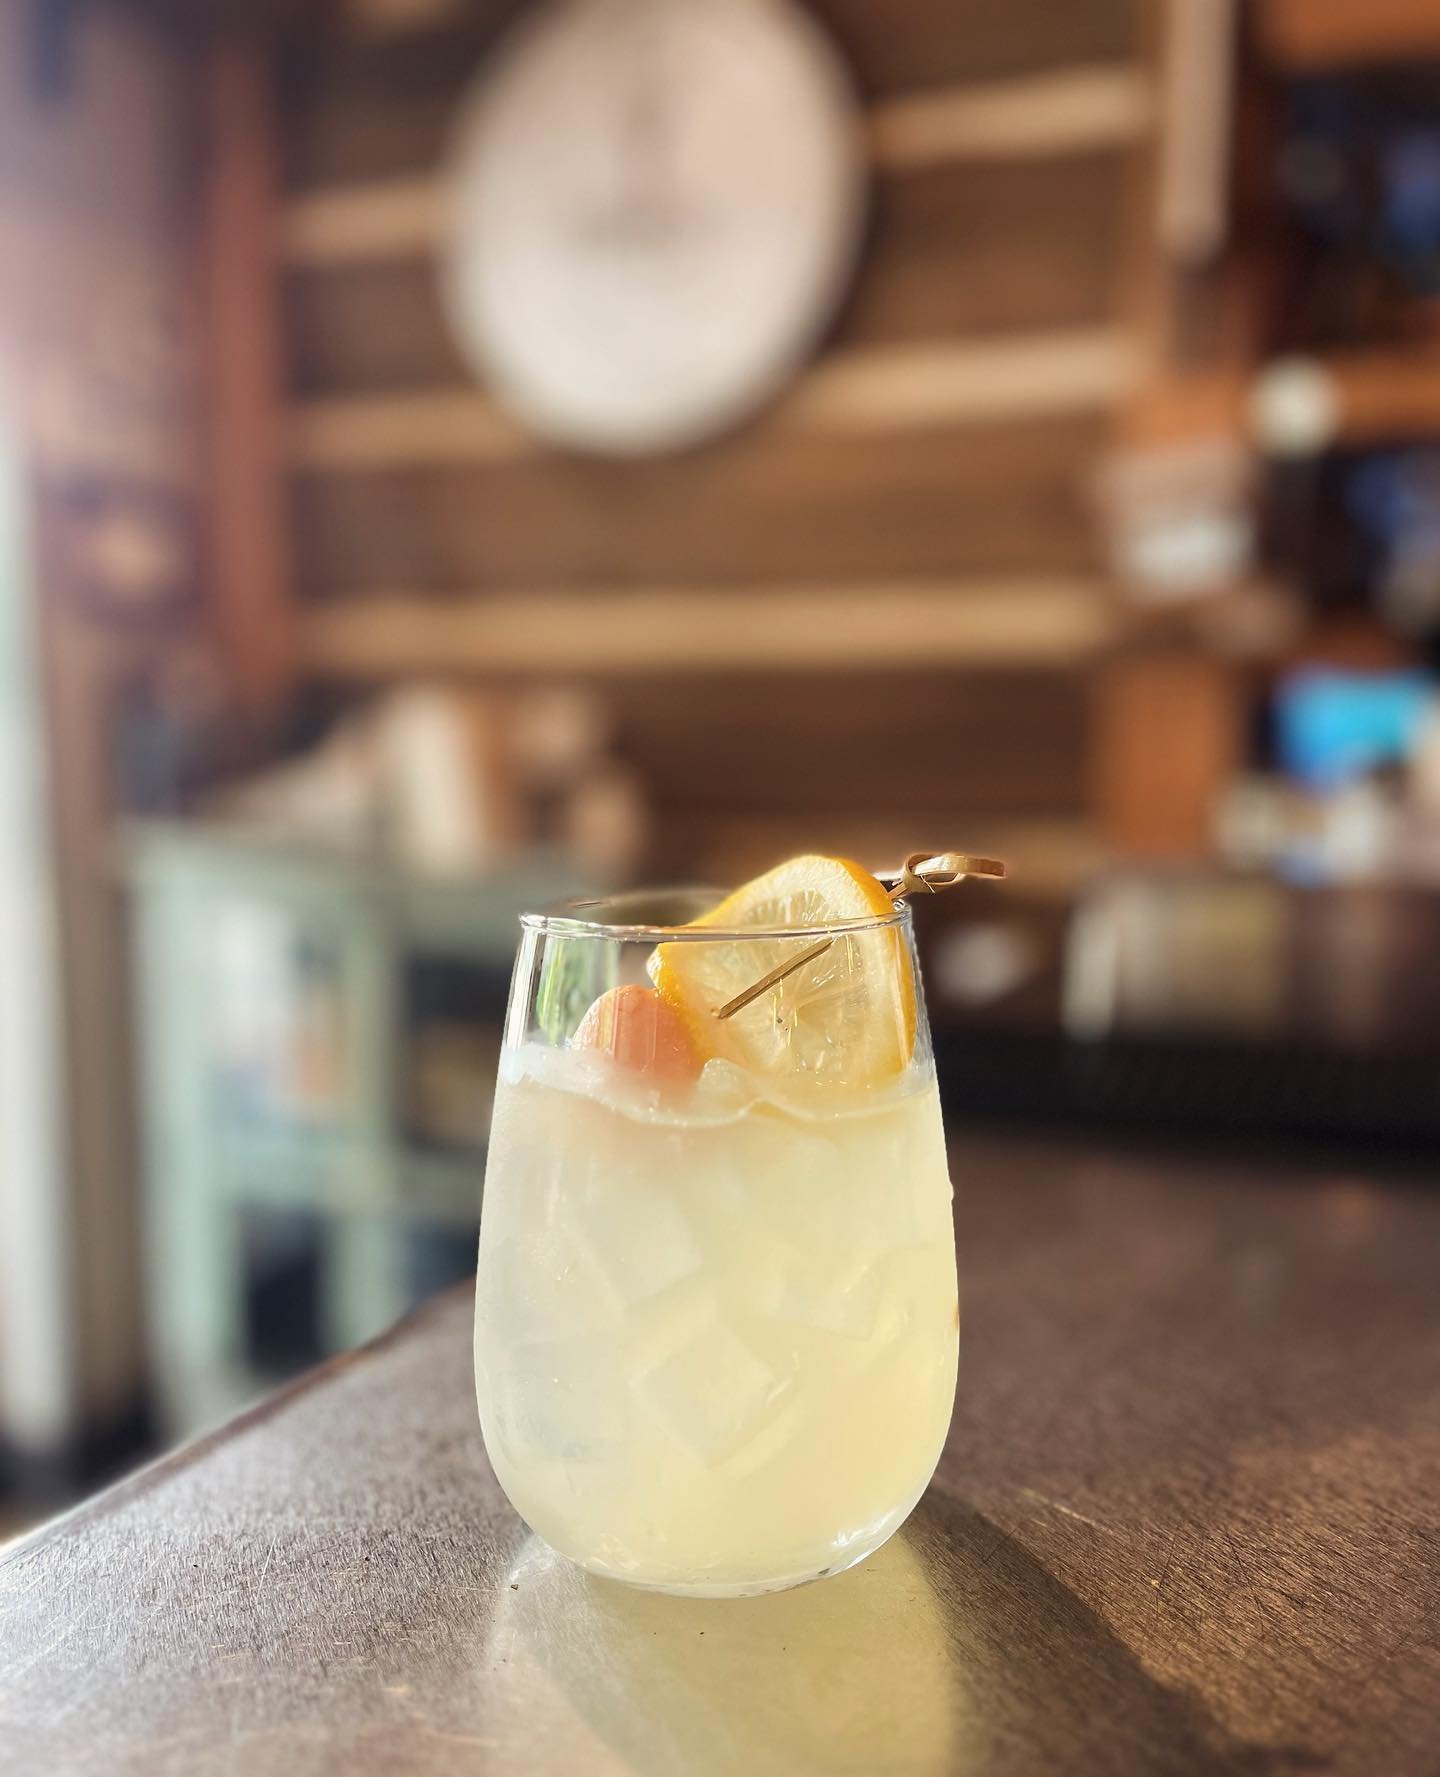 Introducing: Lychee Lemonade. You won&rsquo;t believe how delicious and refreshing. #YNFD (your new favorite drink). Recommended for all ages. #lychees #nonalcoholic #summervibes #southmiami